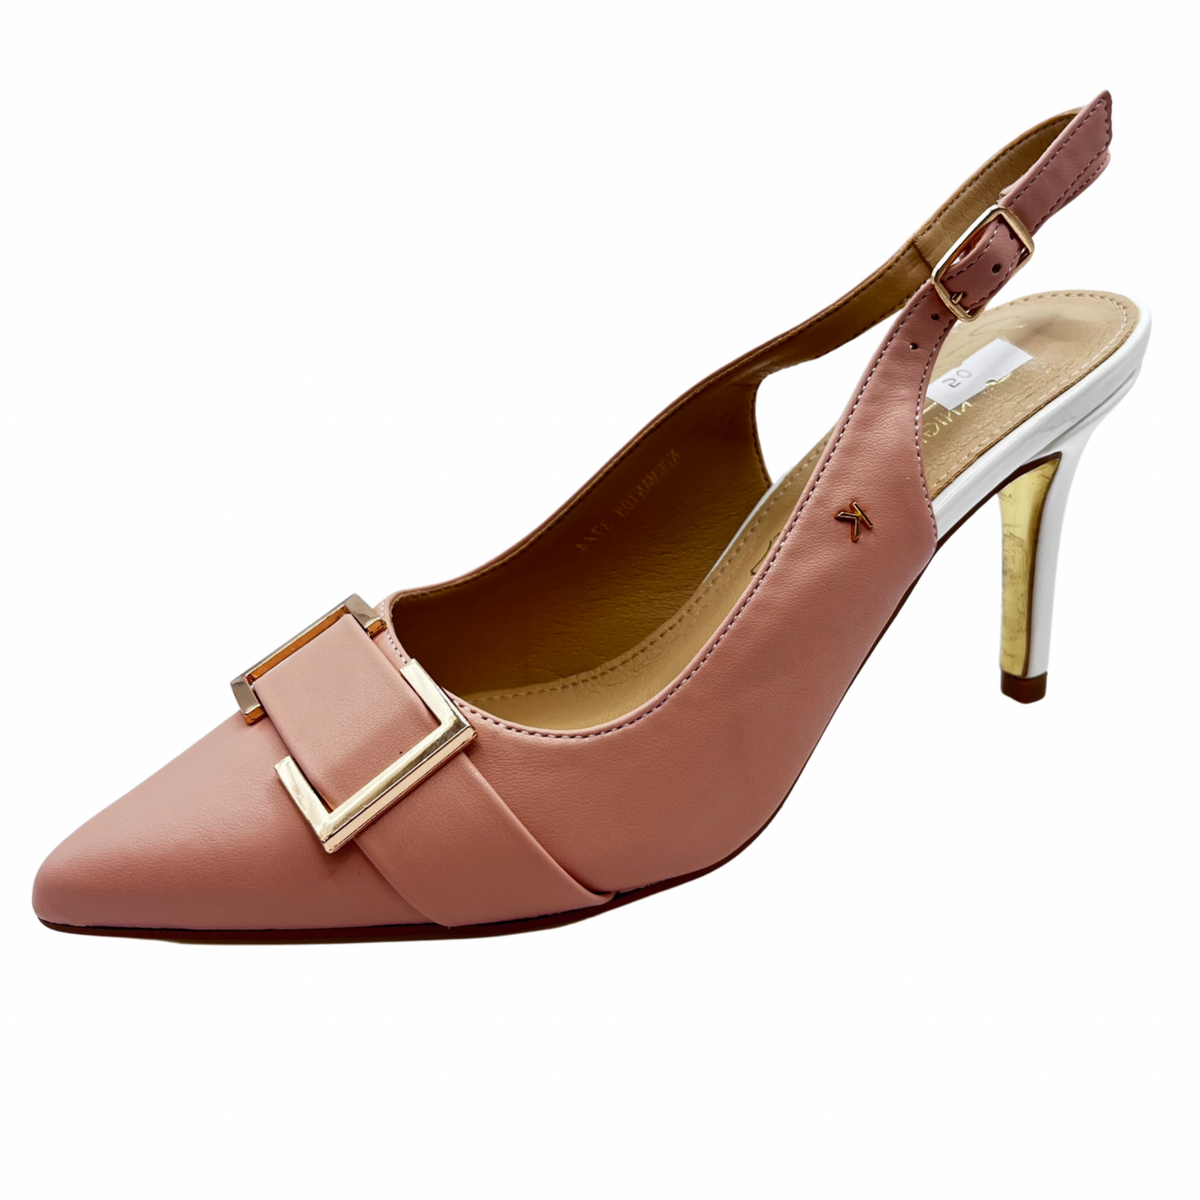 Kate Appleby White and Blush Leather Slingback Heel